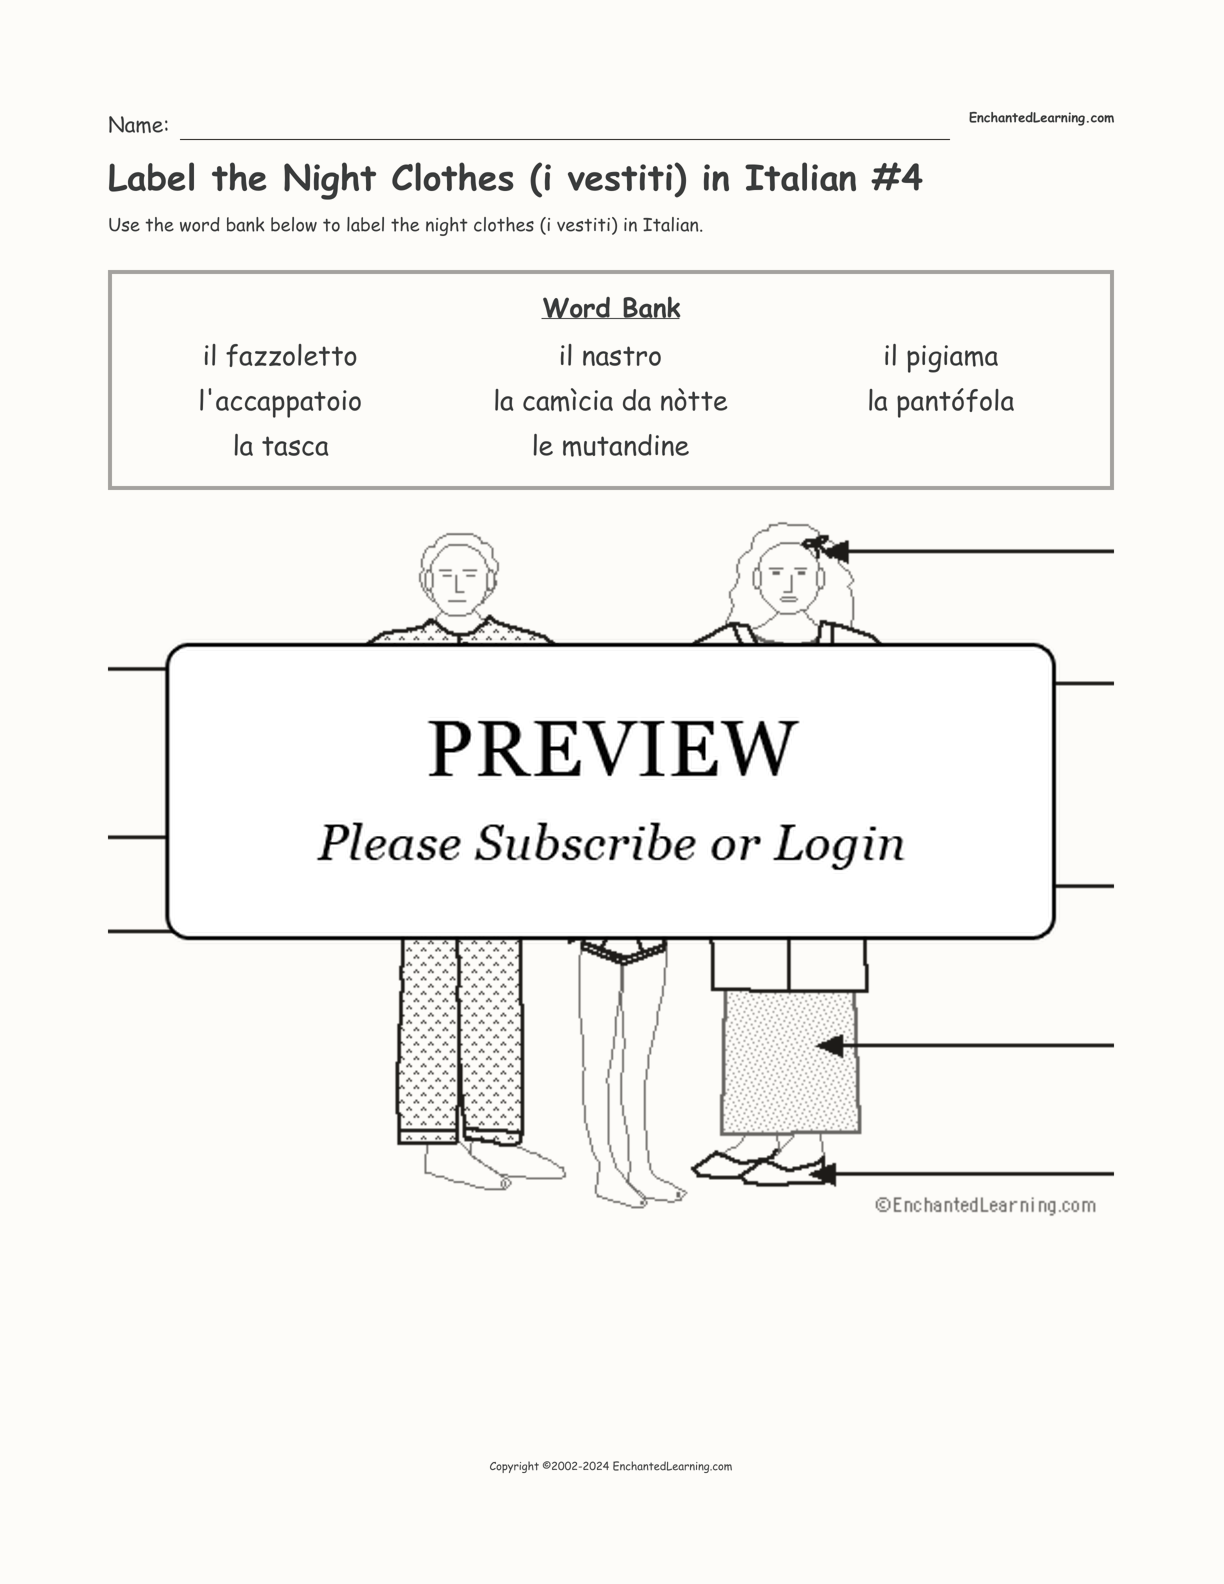 Label the Night Clothes (i vestiti) in Italian #4 interactive worksheet page 1